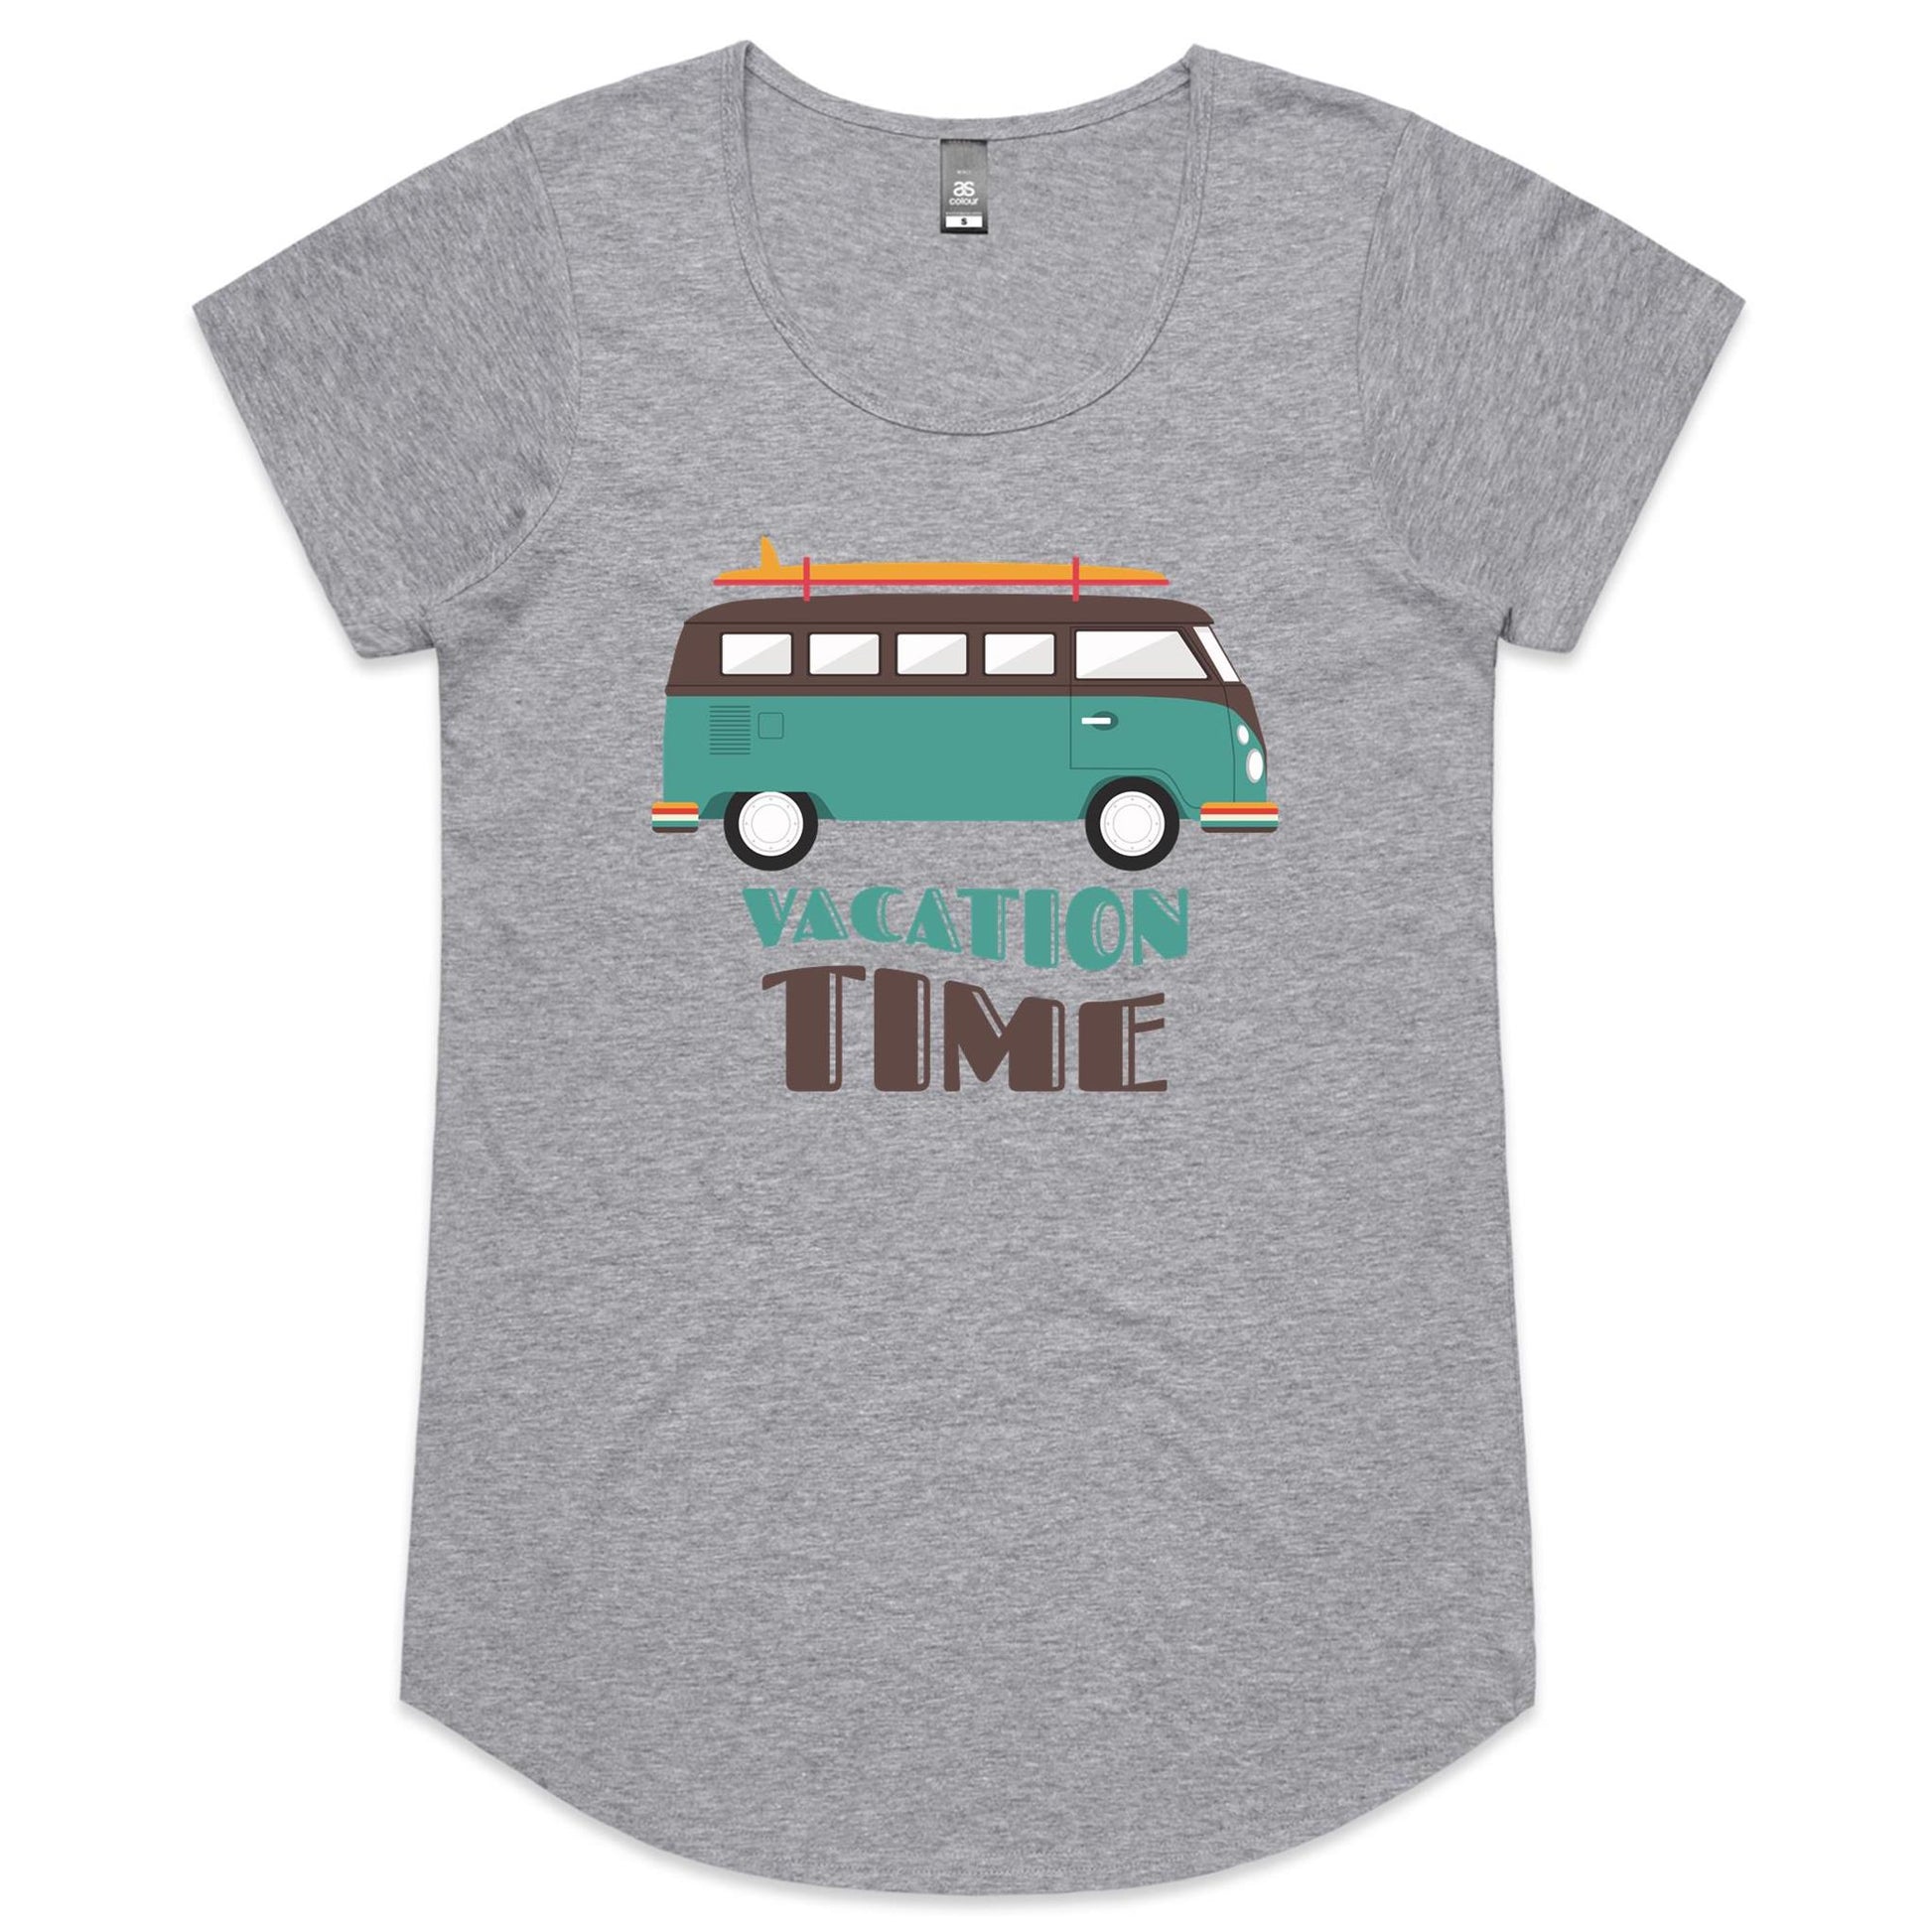 Vacation Time - Womens Scoop Neck T-Shirt Grey Marle Womens Scoop Neck T-shirt Summer Womens